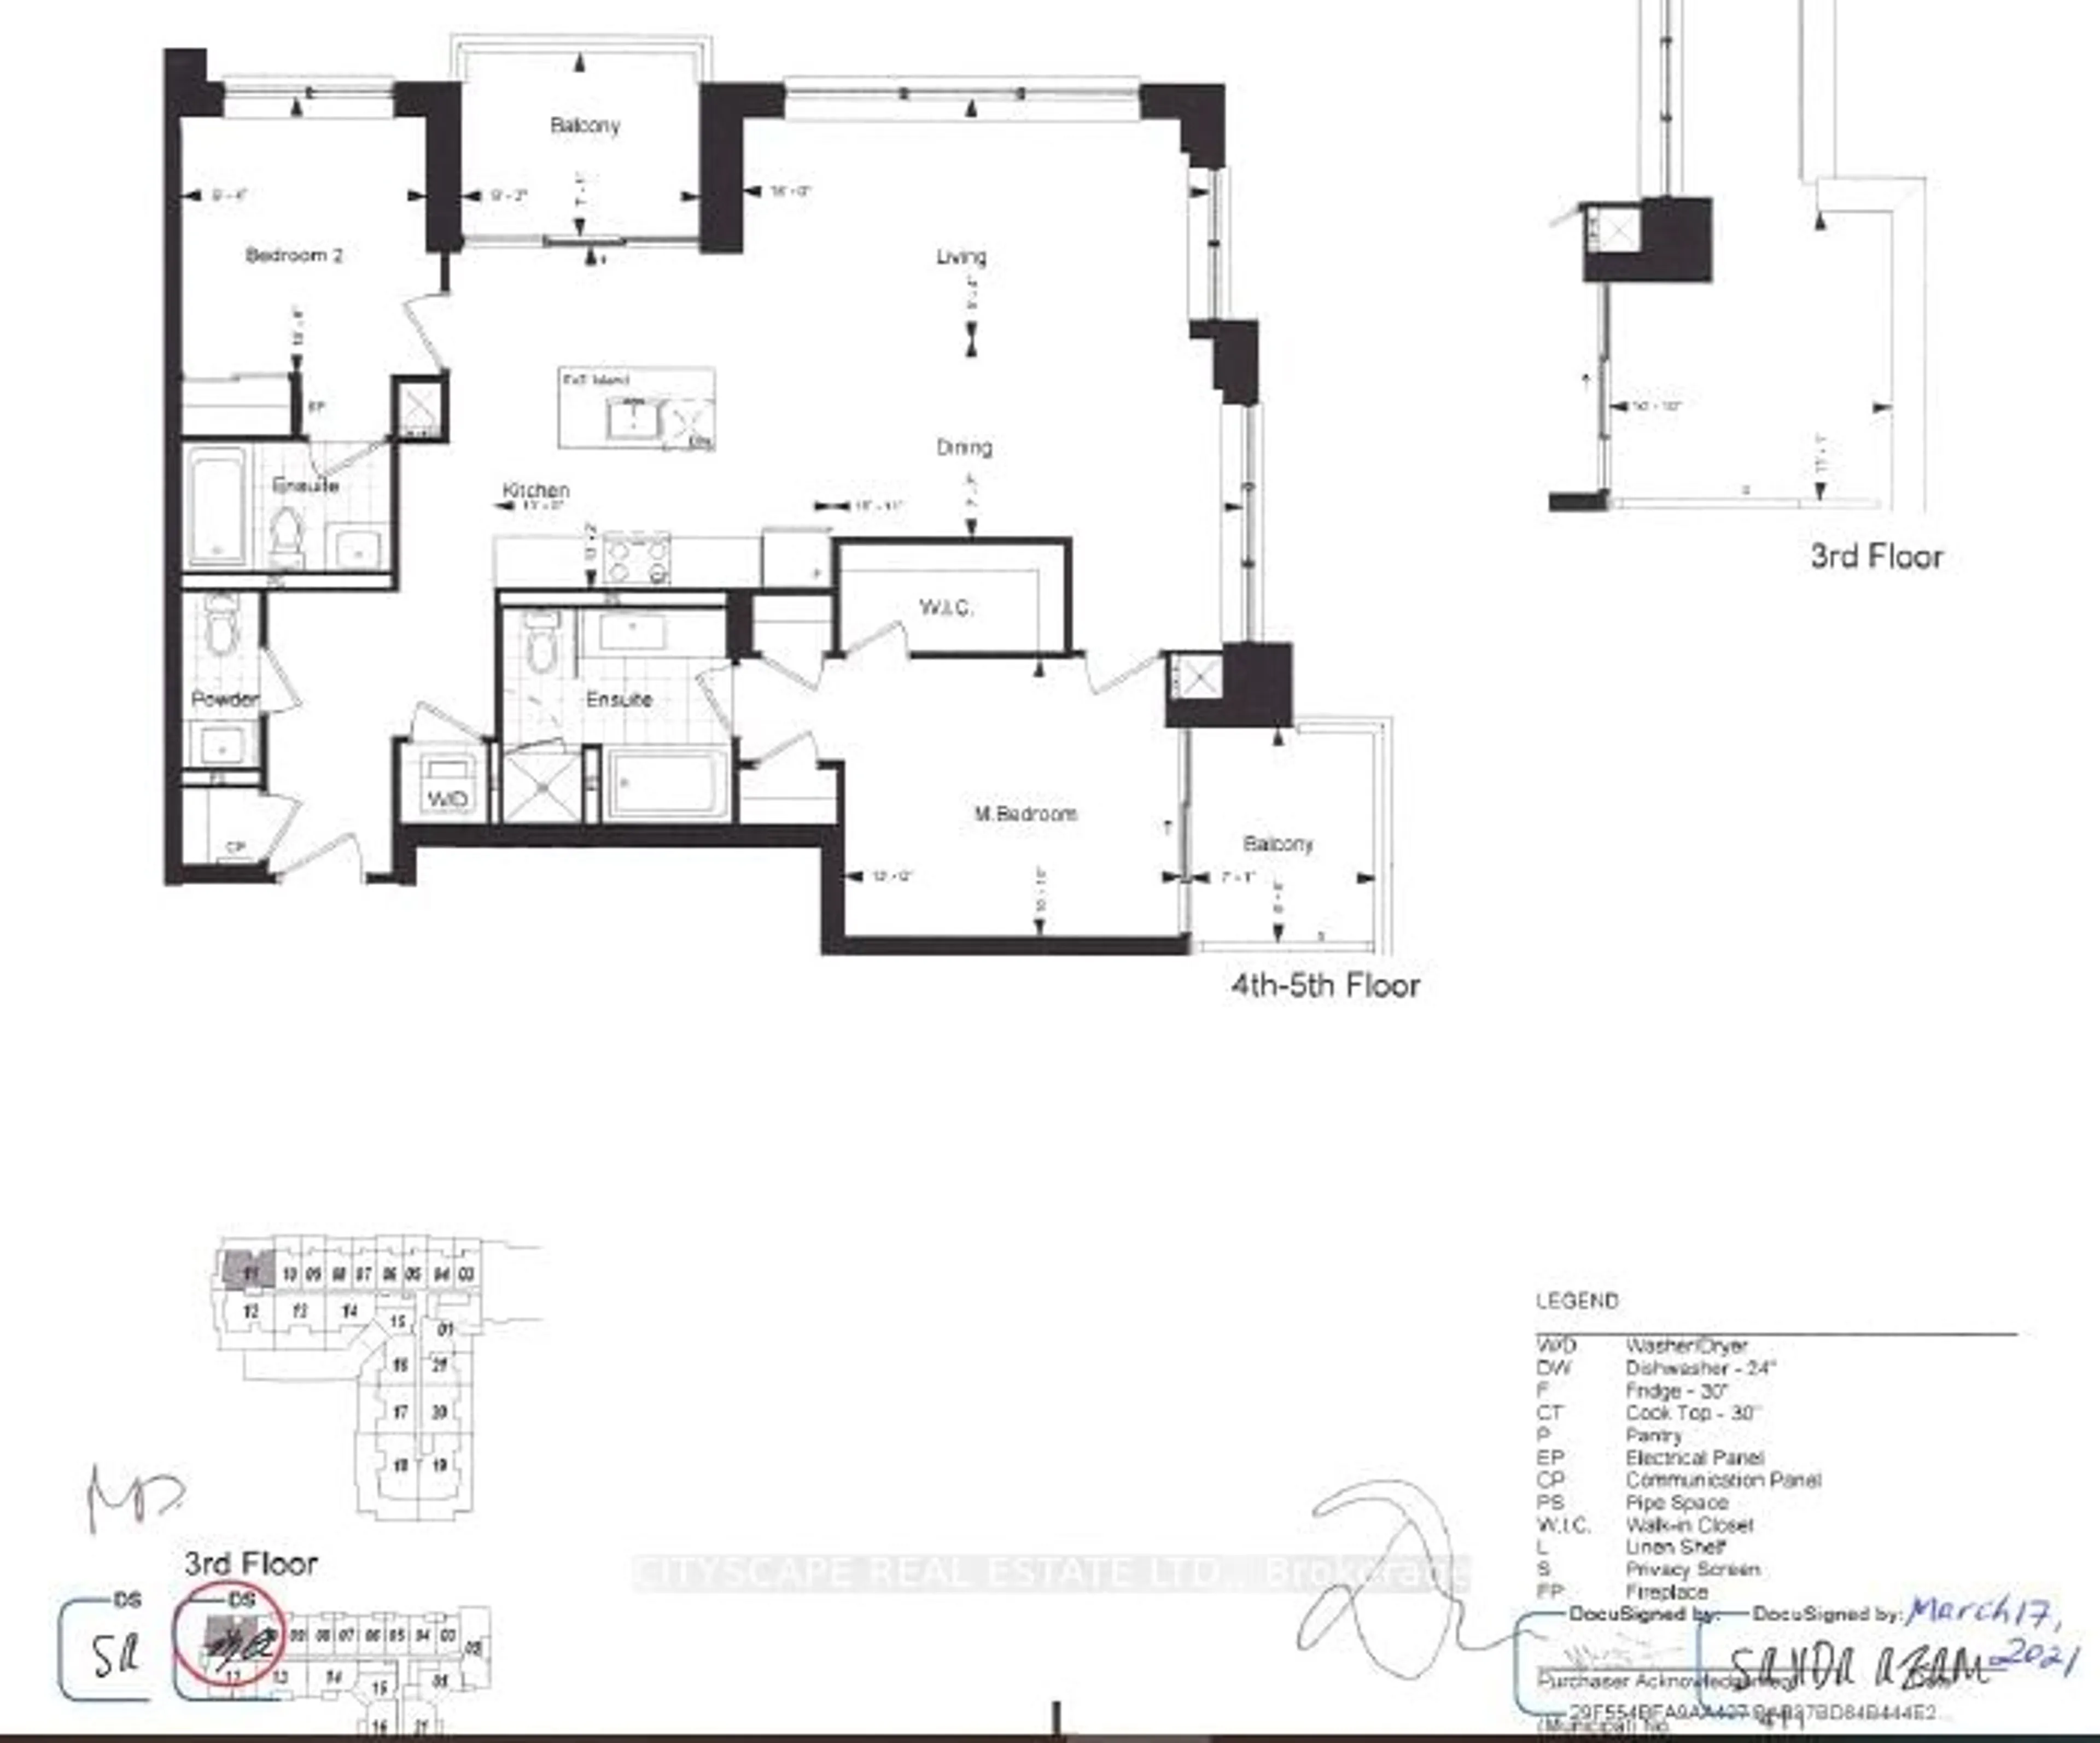 Floor plan for 11782 Ninth Line #411, Whitchurch-Stouffville Ontario L4A 8B4